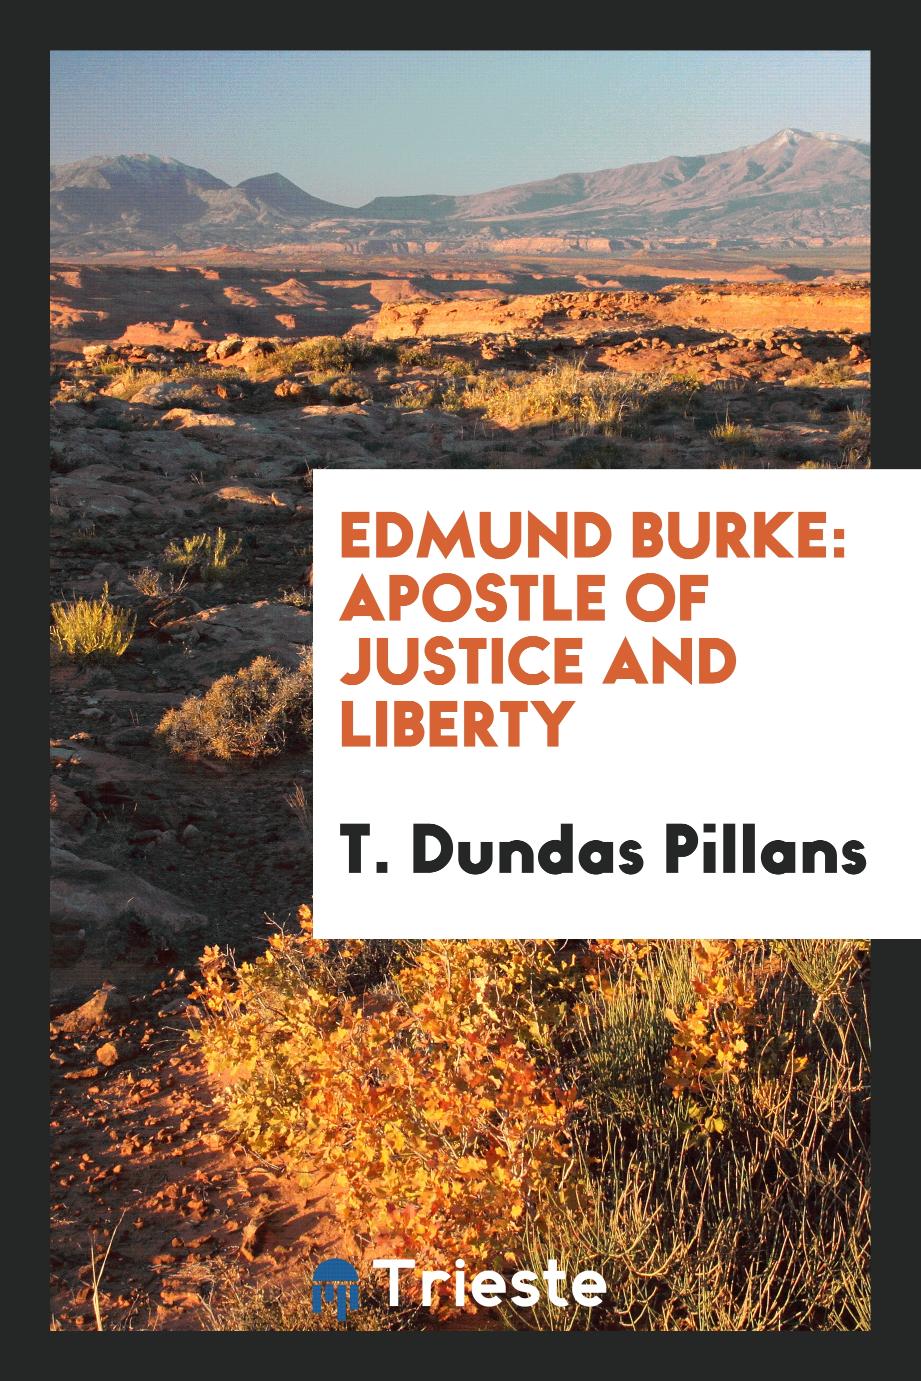 Edmund Burke: apostle of justice and liberty